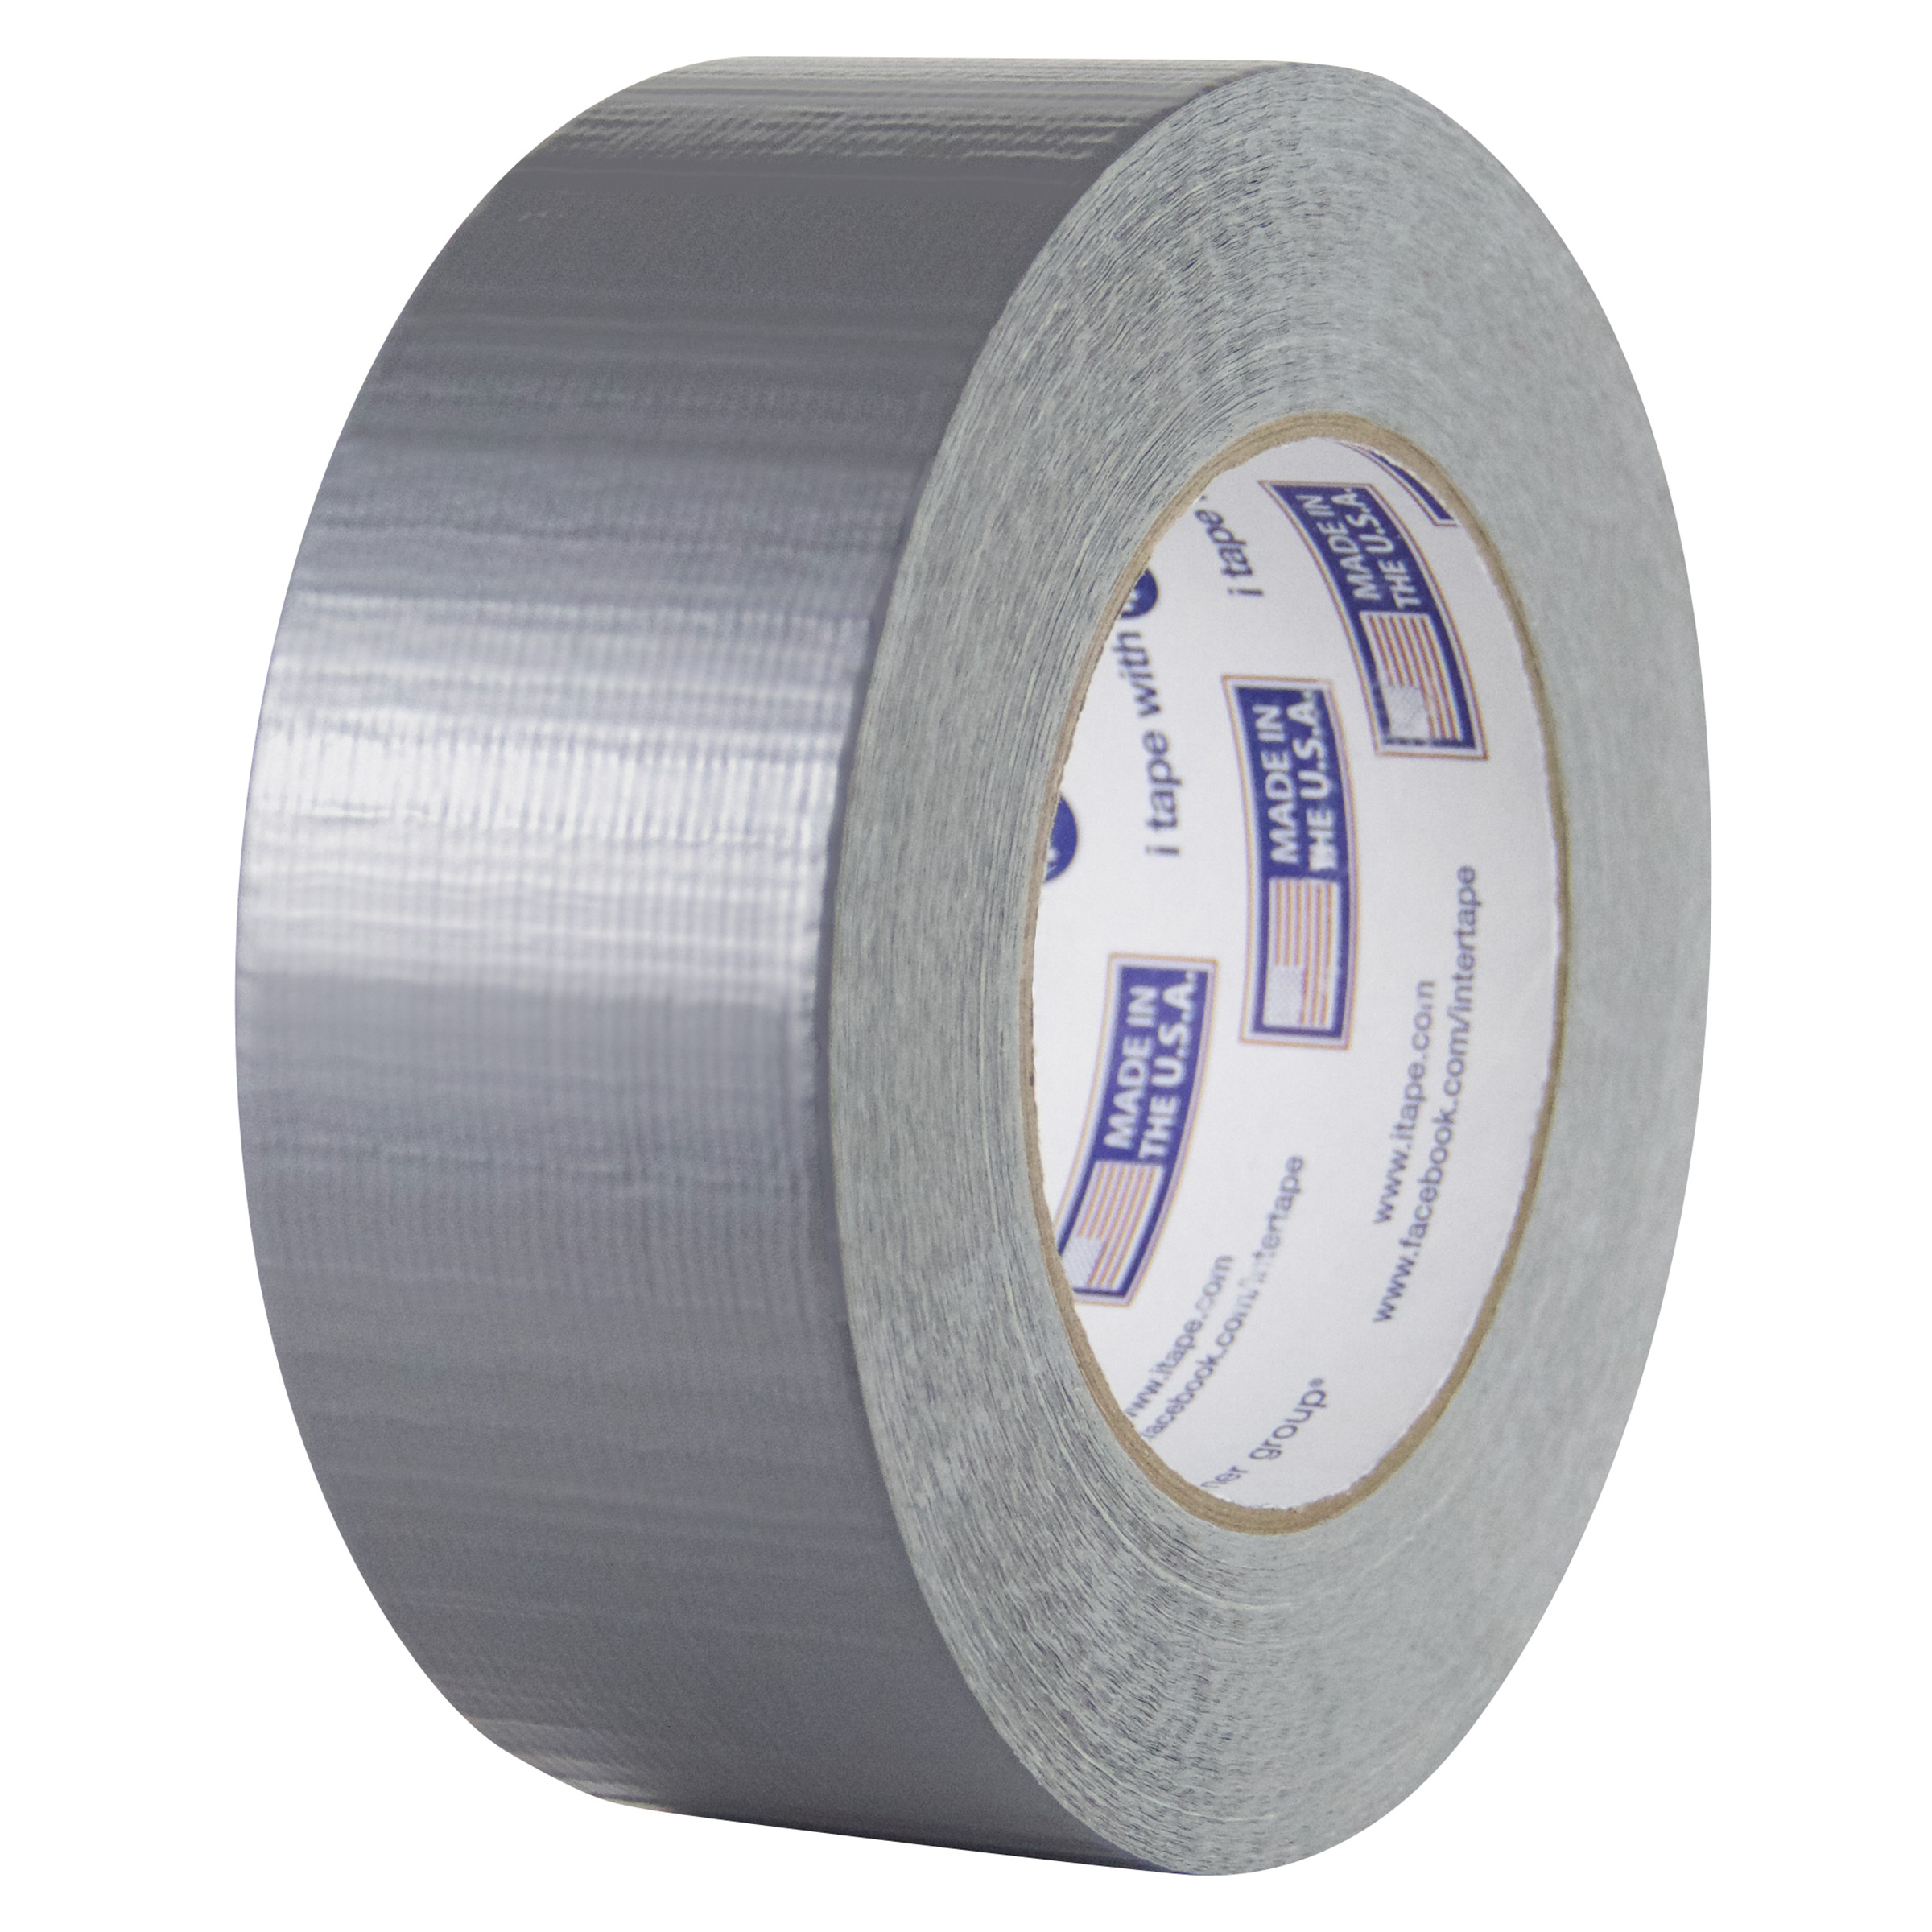 Spine-binding tape  Adhesive products, fastening, packaging material